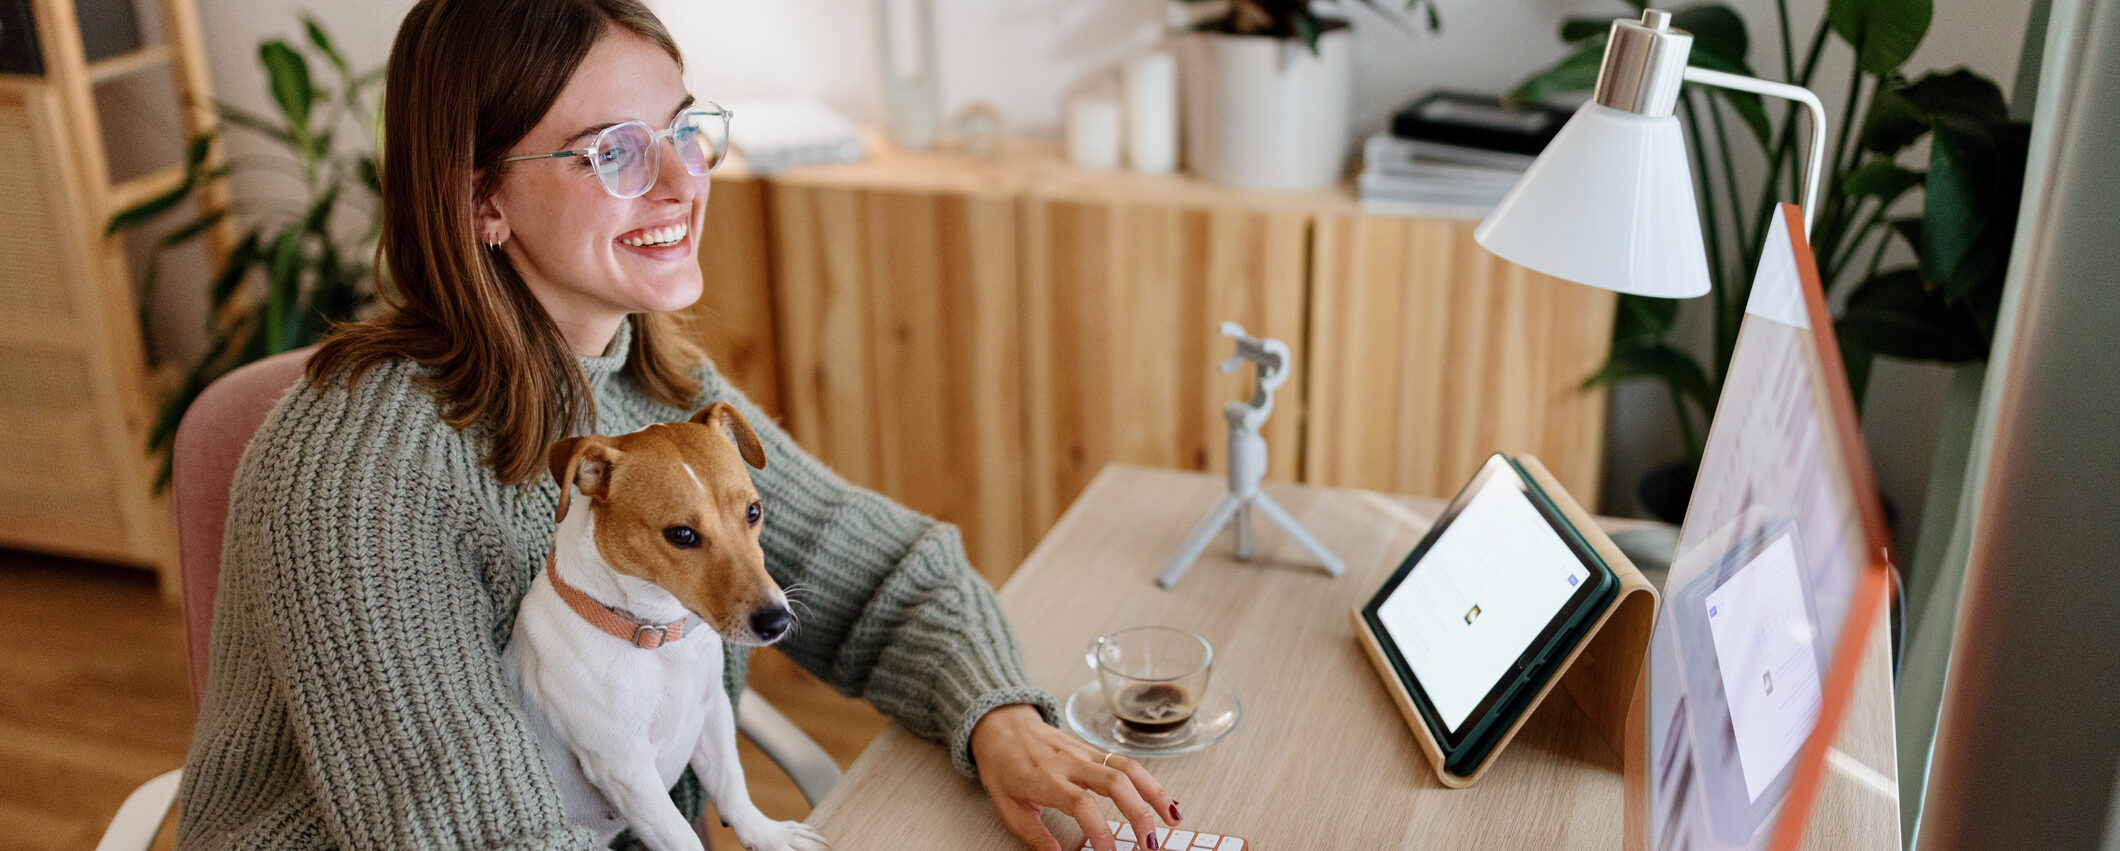 Woman with glasses sitting at a desk with a dog, both looking focused and engaged with the computer screen.